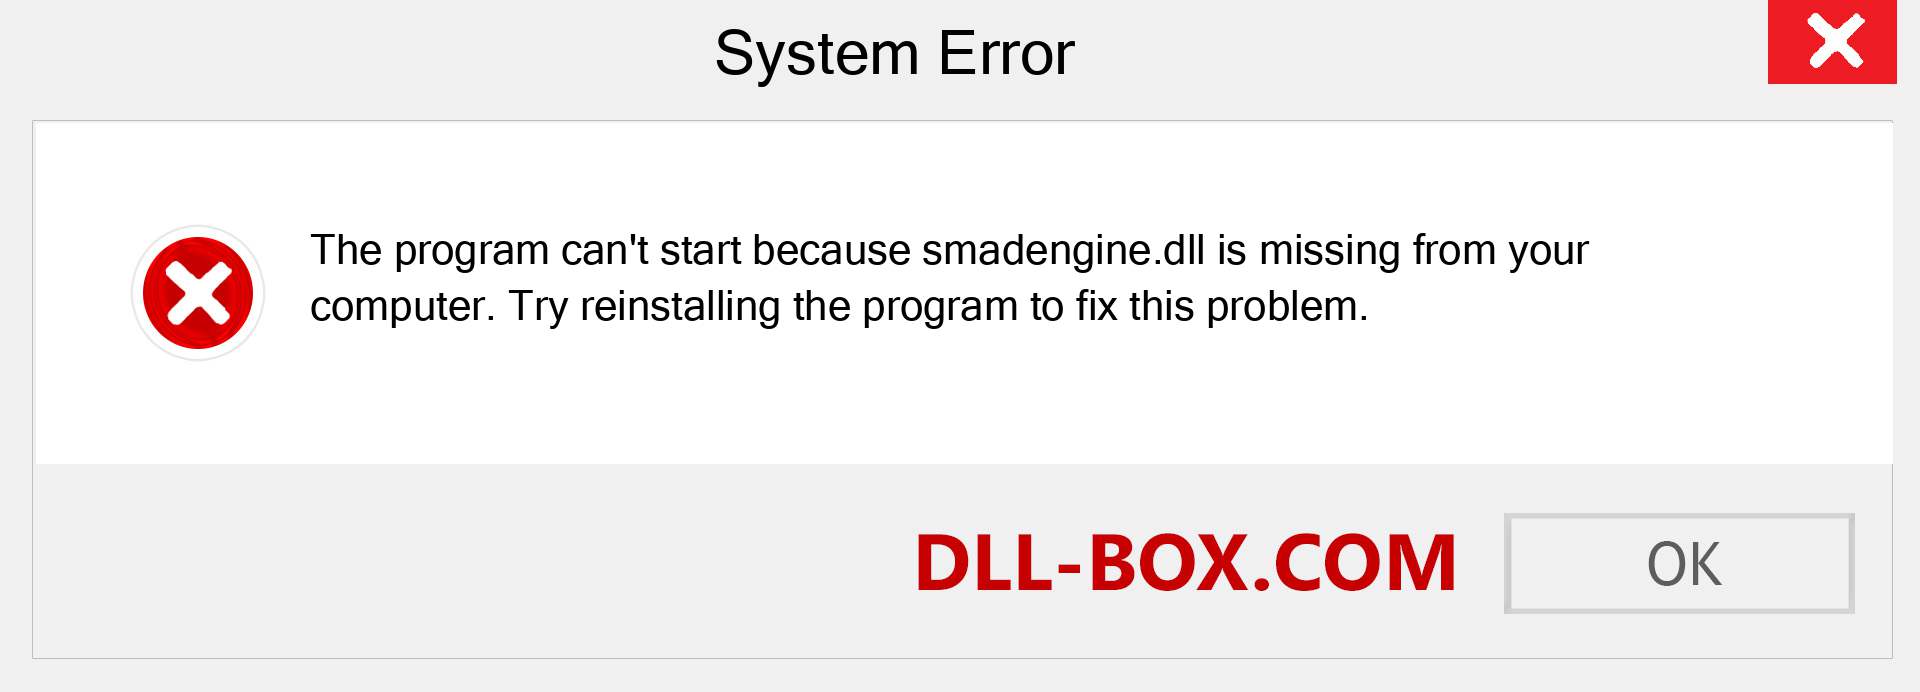  smadengine.dll file is missing?. Download for Windows 7, 8, 10 - Fix  smadengine dll Missing Error on Windows, photos, images